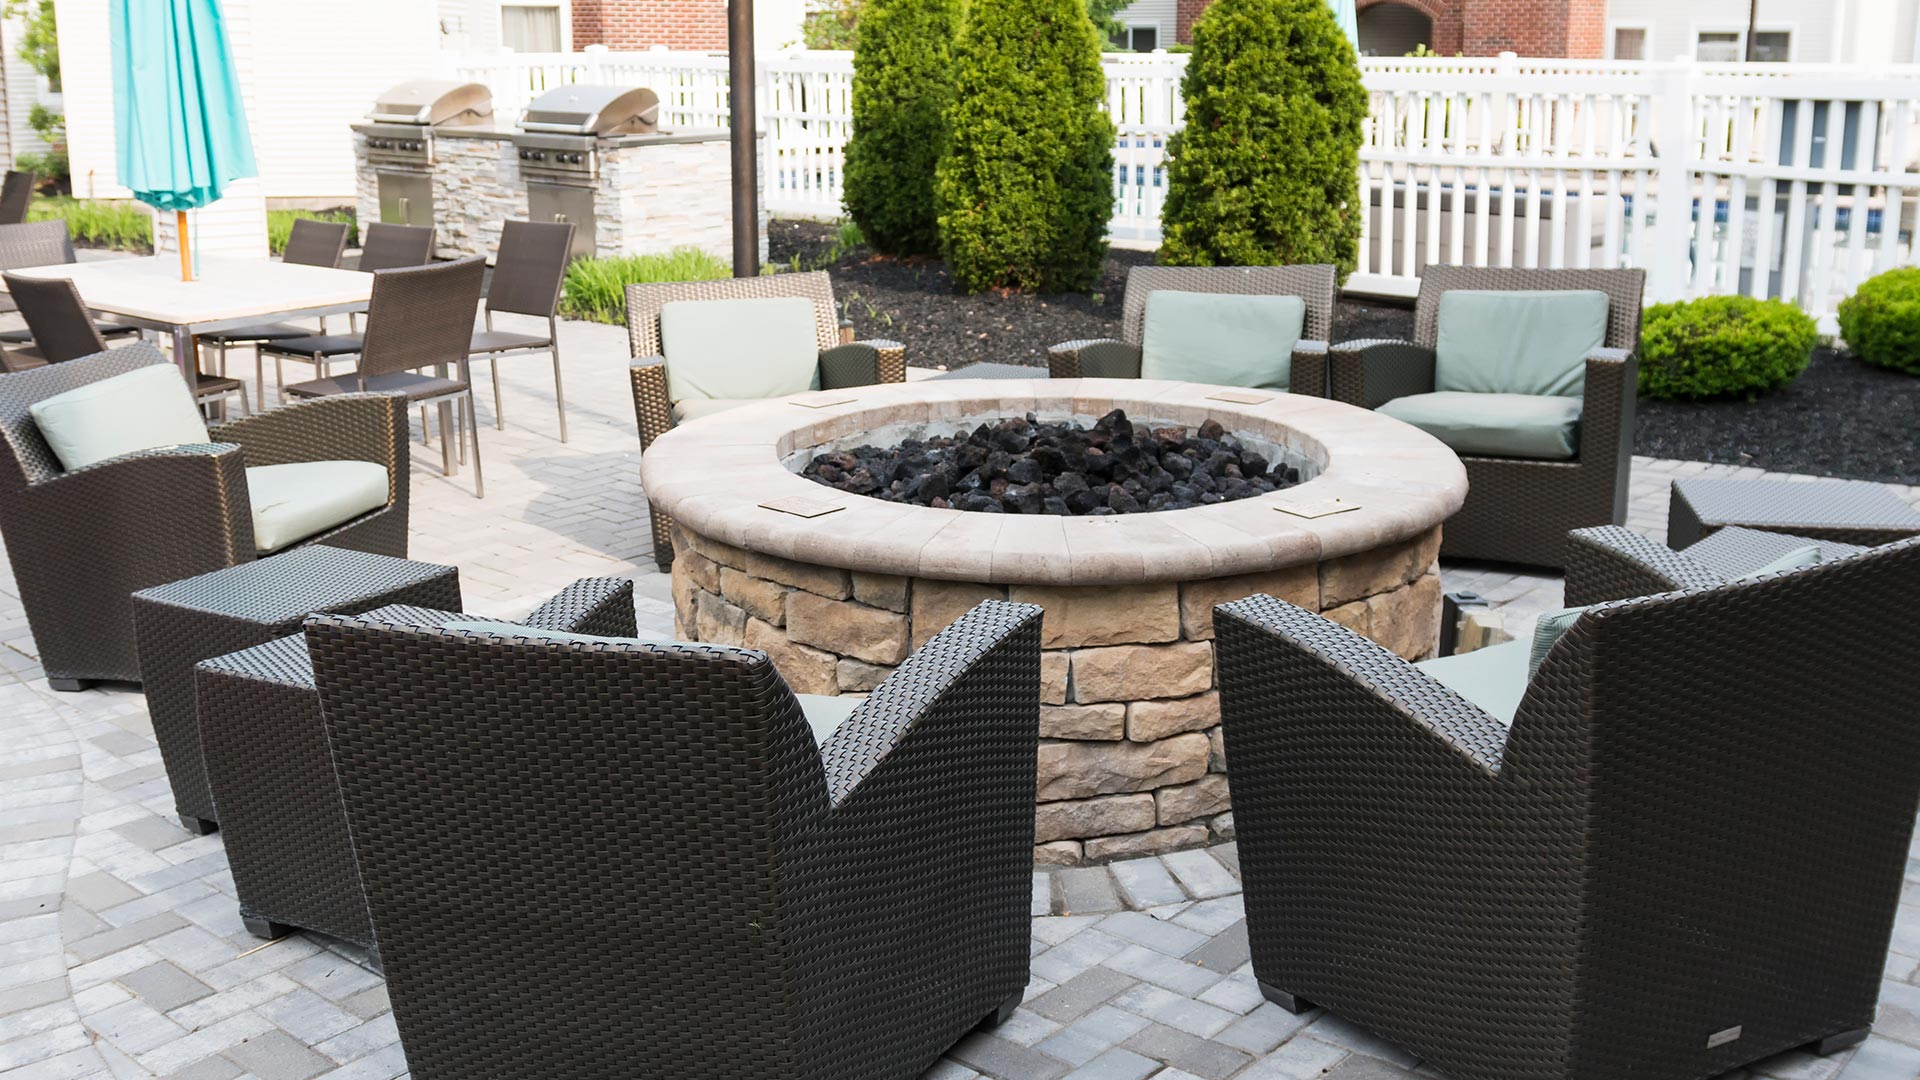 Custom fire pit and patio with chairs at a property in Ankeny, IA.